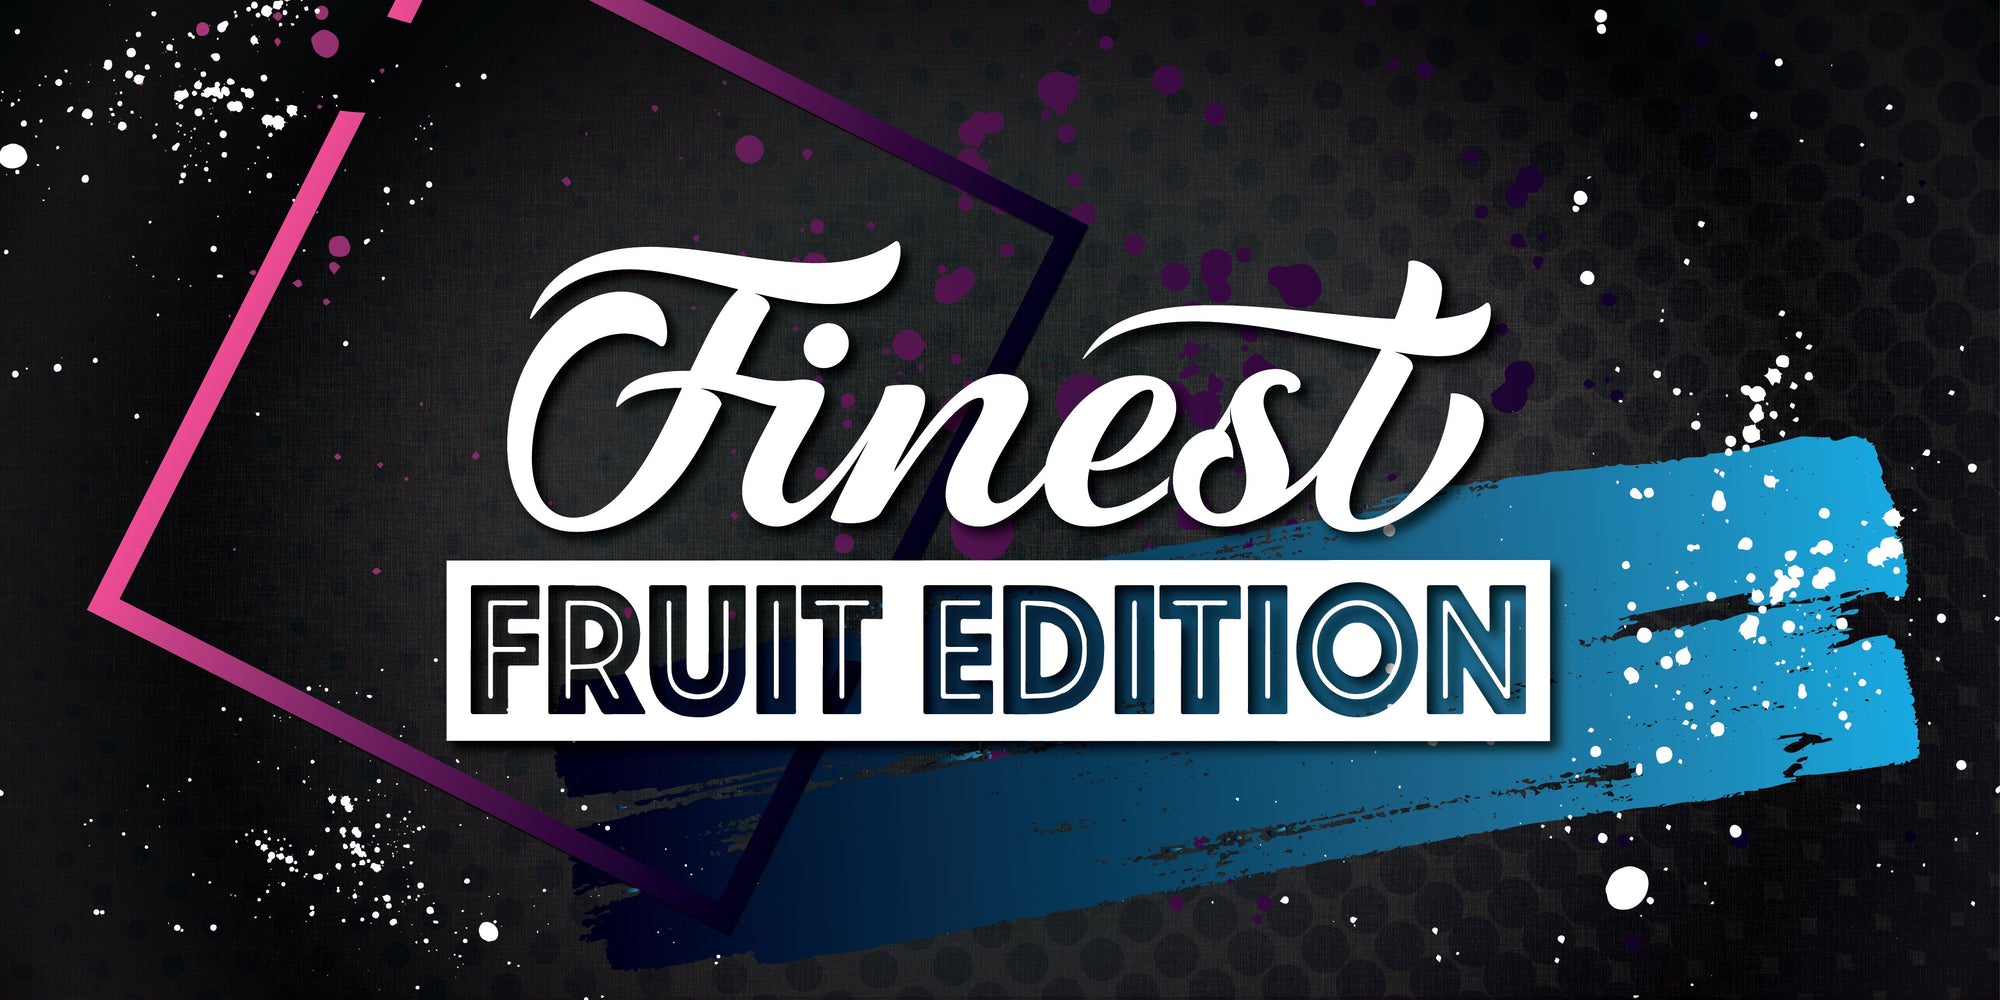 The Finest Fruit Edition